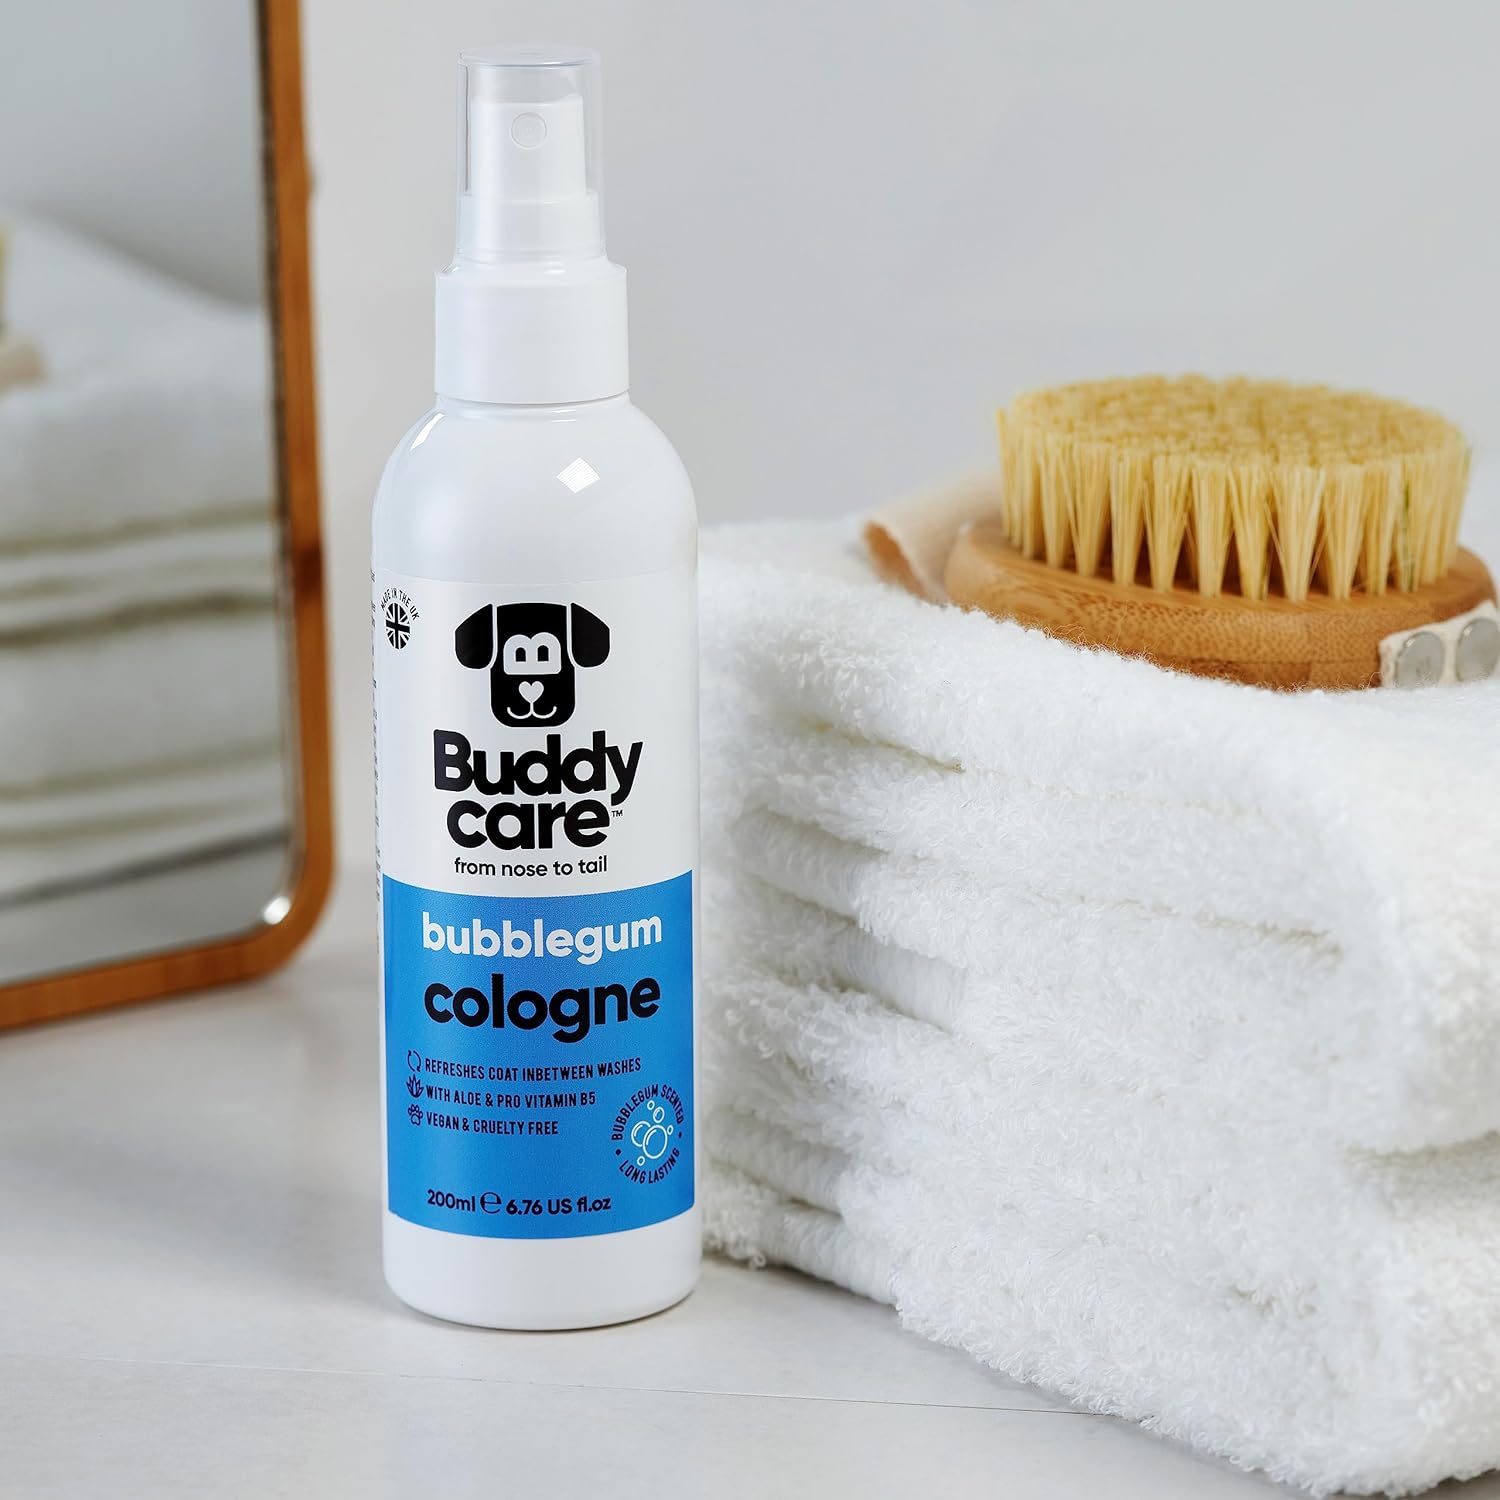 Buddycare Dog Cologne - Bubblegum - 200ml - Sweet and Playful Scented Dog Cologne - Refreshes Between Dog Washes :Pet Supplies